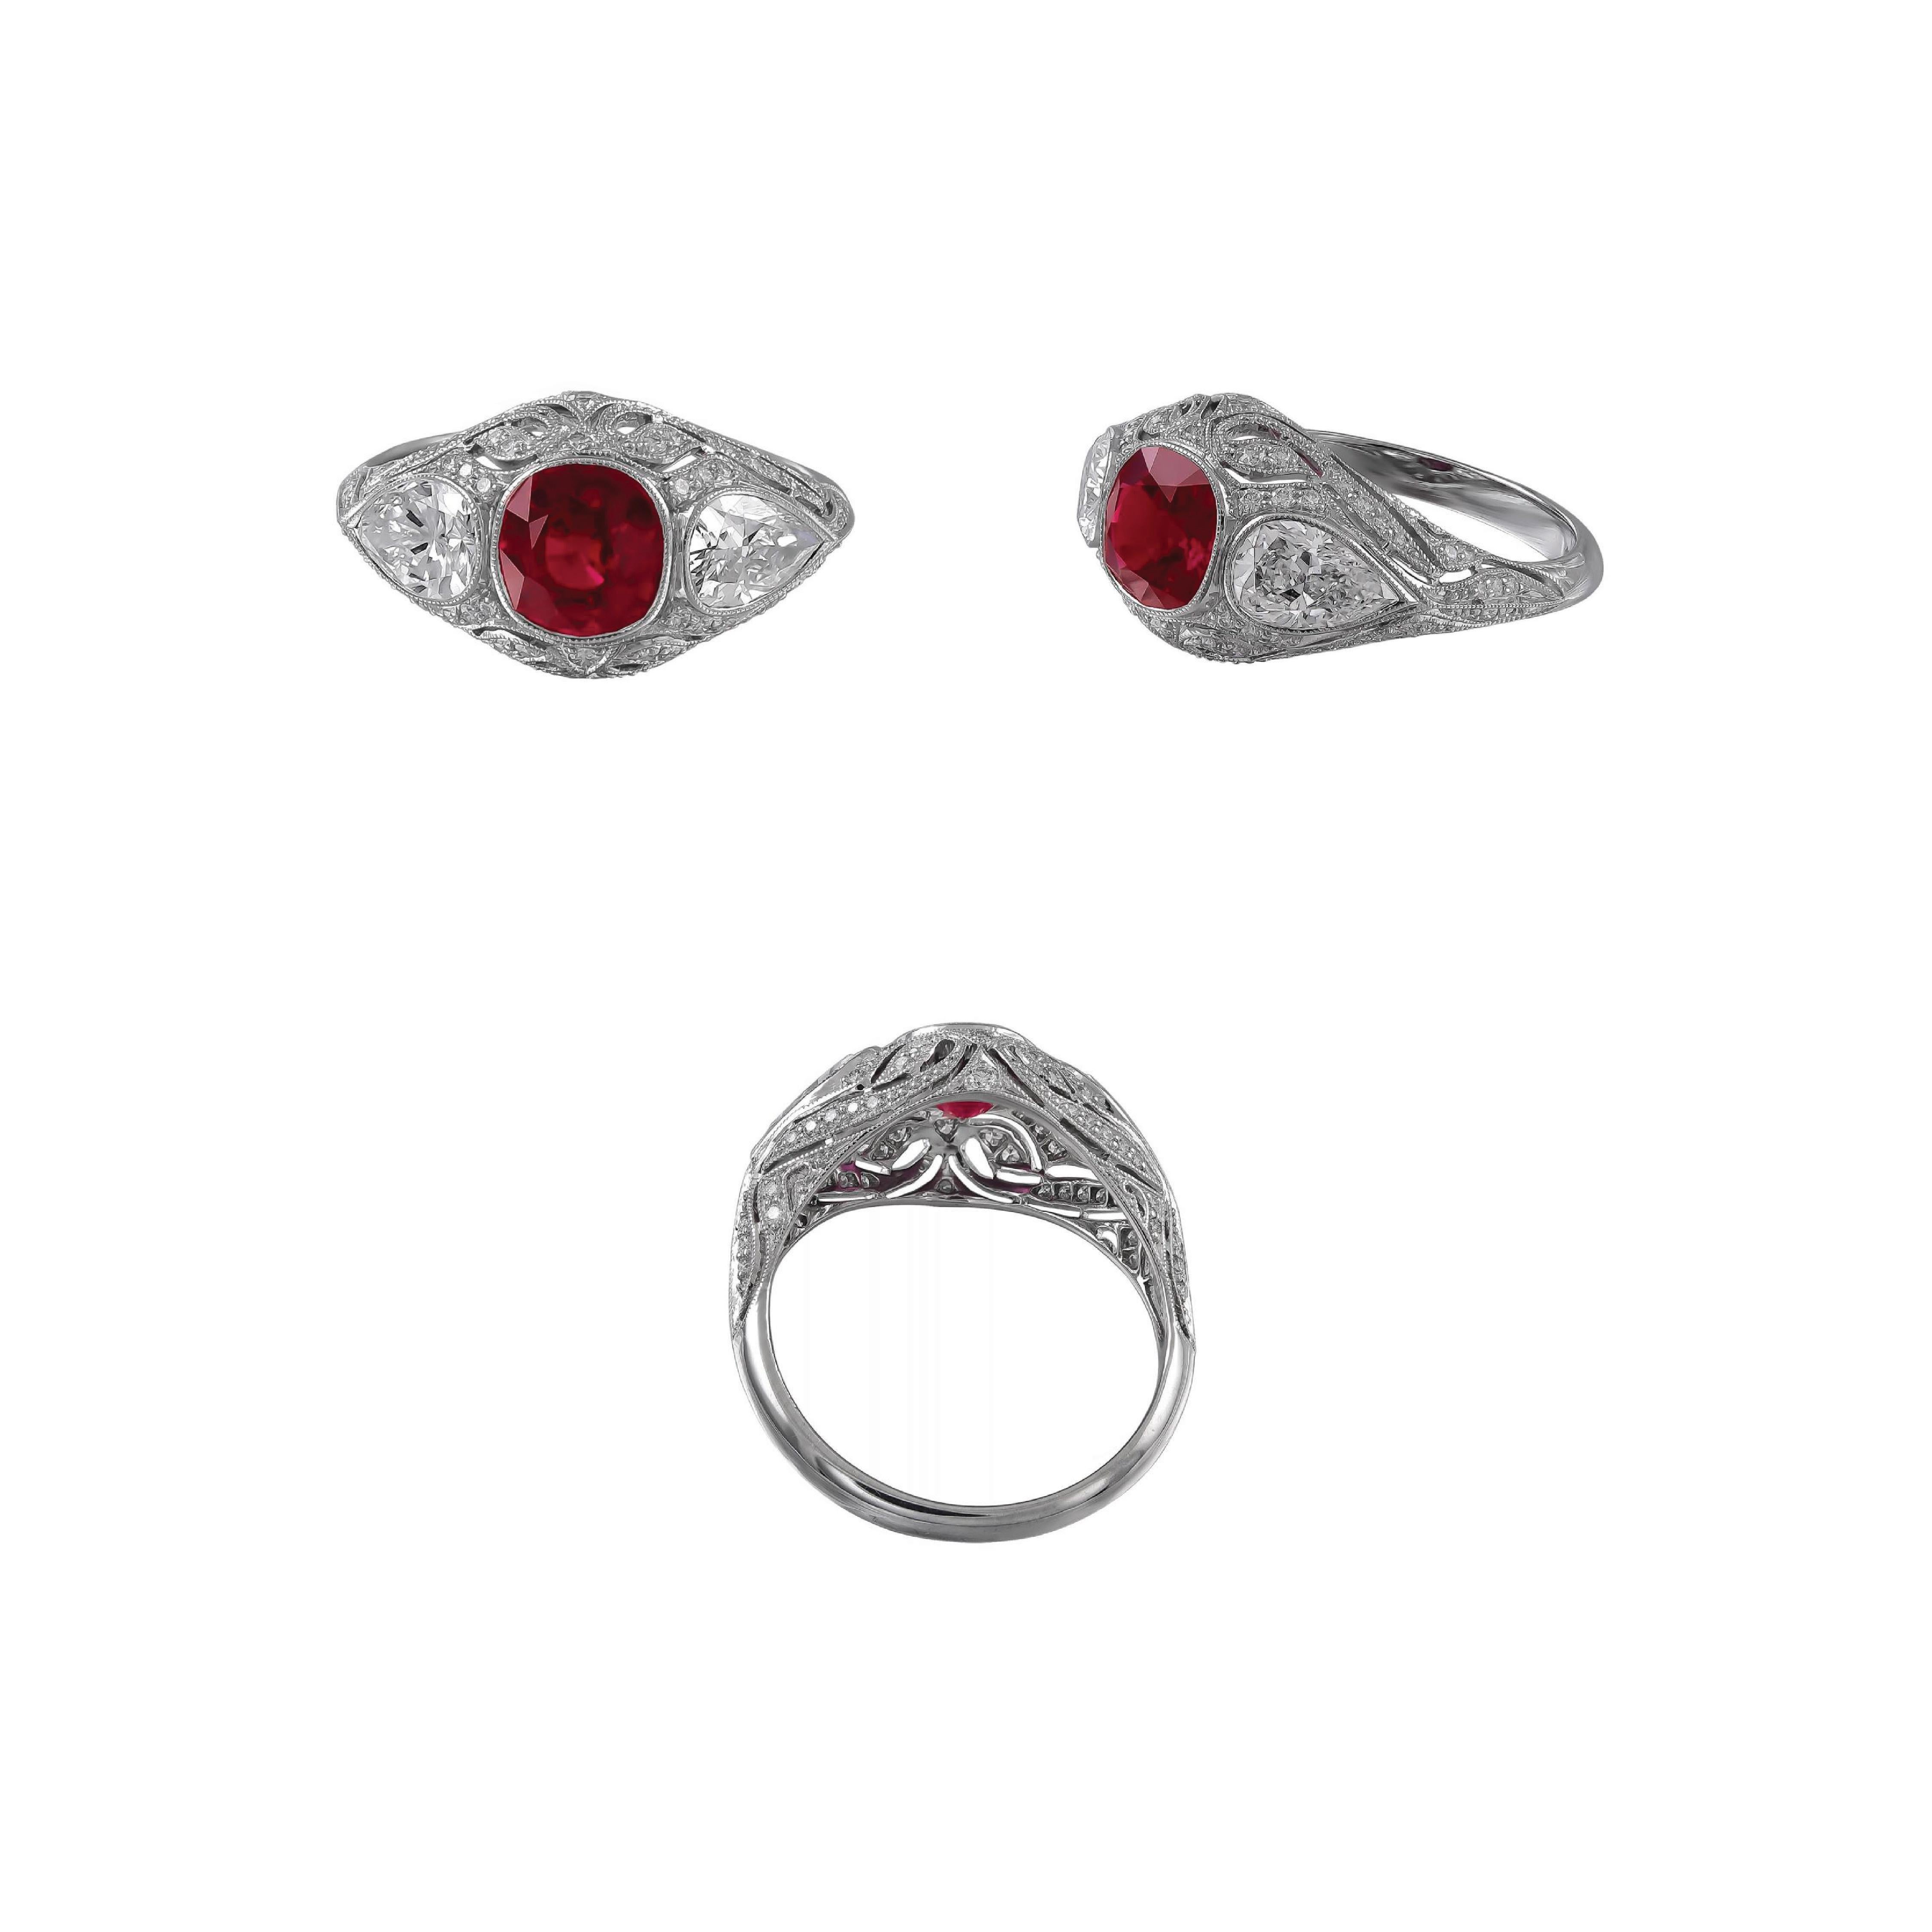 Sophia D, 0.23 Carat Art Deco Style Ruby Ring Set in Platinum In New Condition For Sale In New York, NY